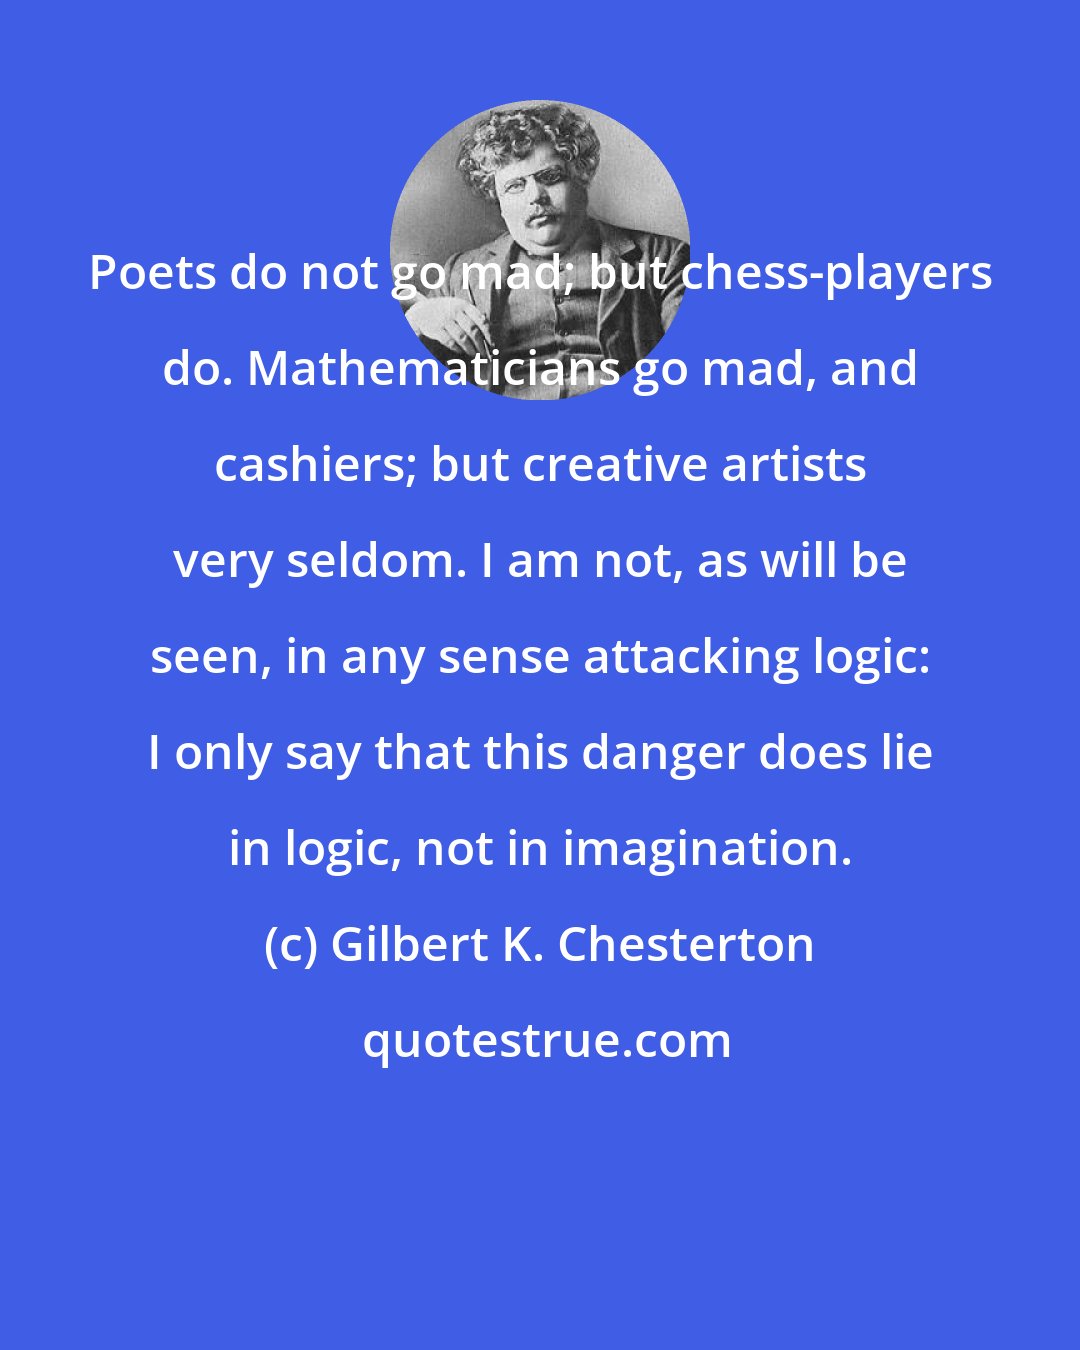 Gilbert K. Chesterton: Poets do not go mad; but chess-players do. Mathematicians go mad, and cashiers; but creative artists very seldom. I am not, as will be seen, in any sense attacking logic: I only say that this danger does lie in logic, not in imagination.